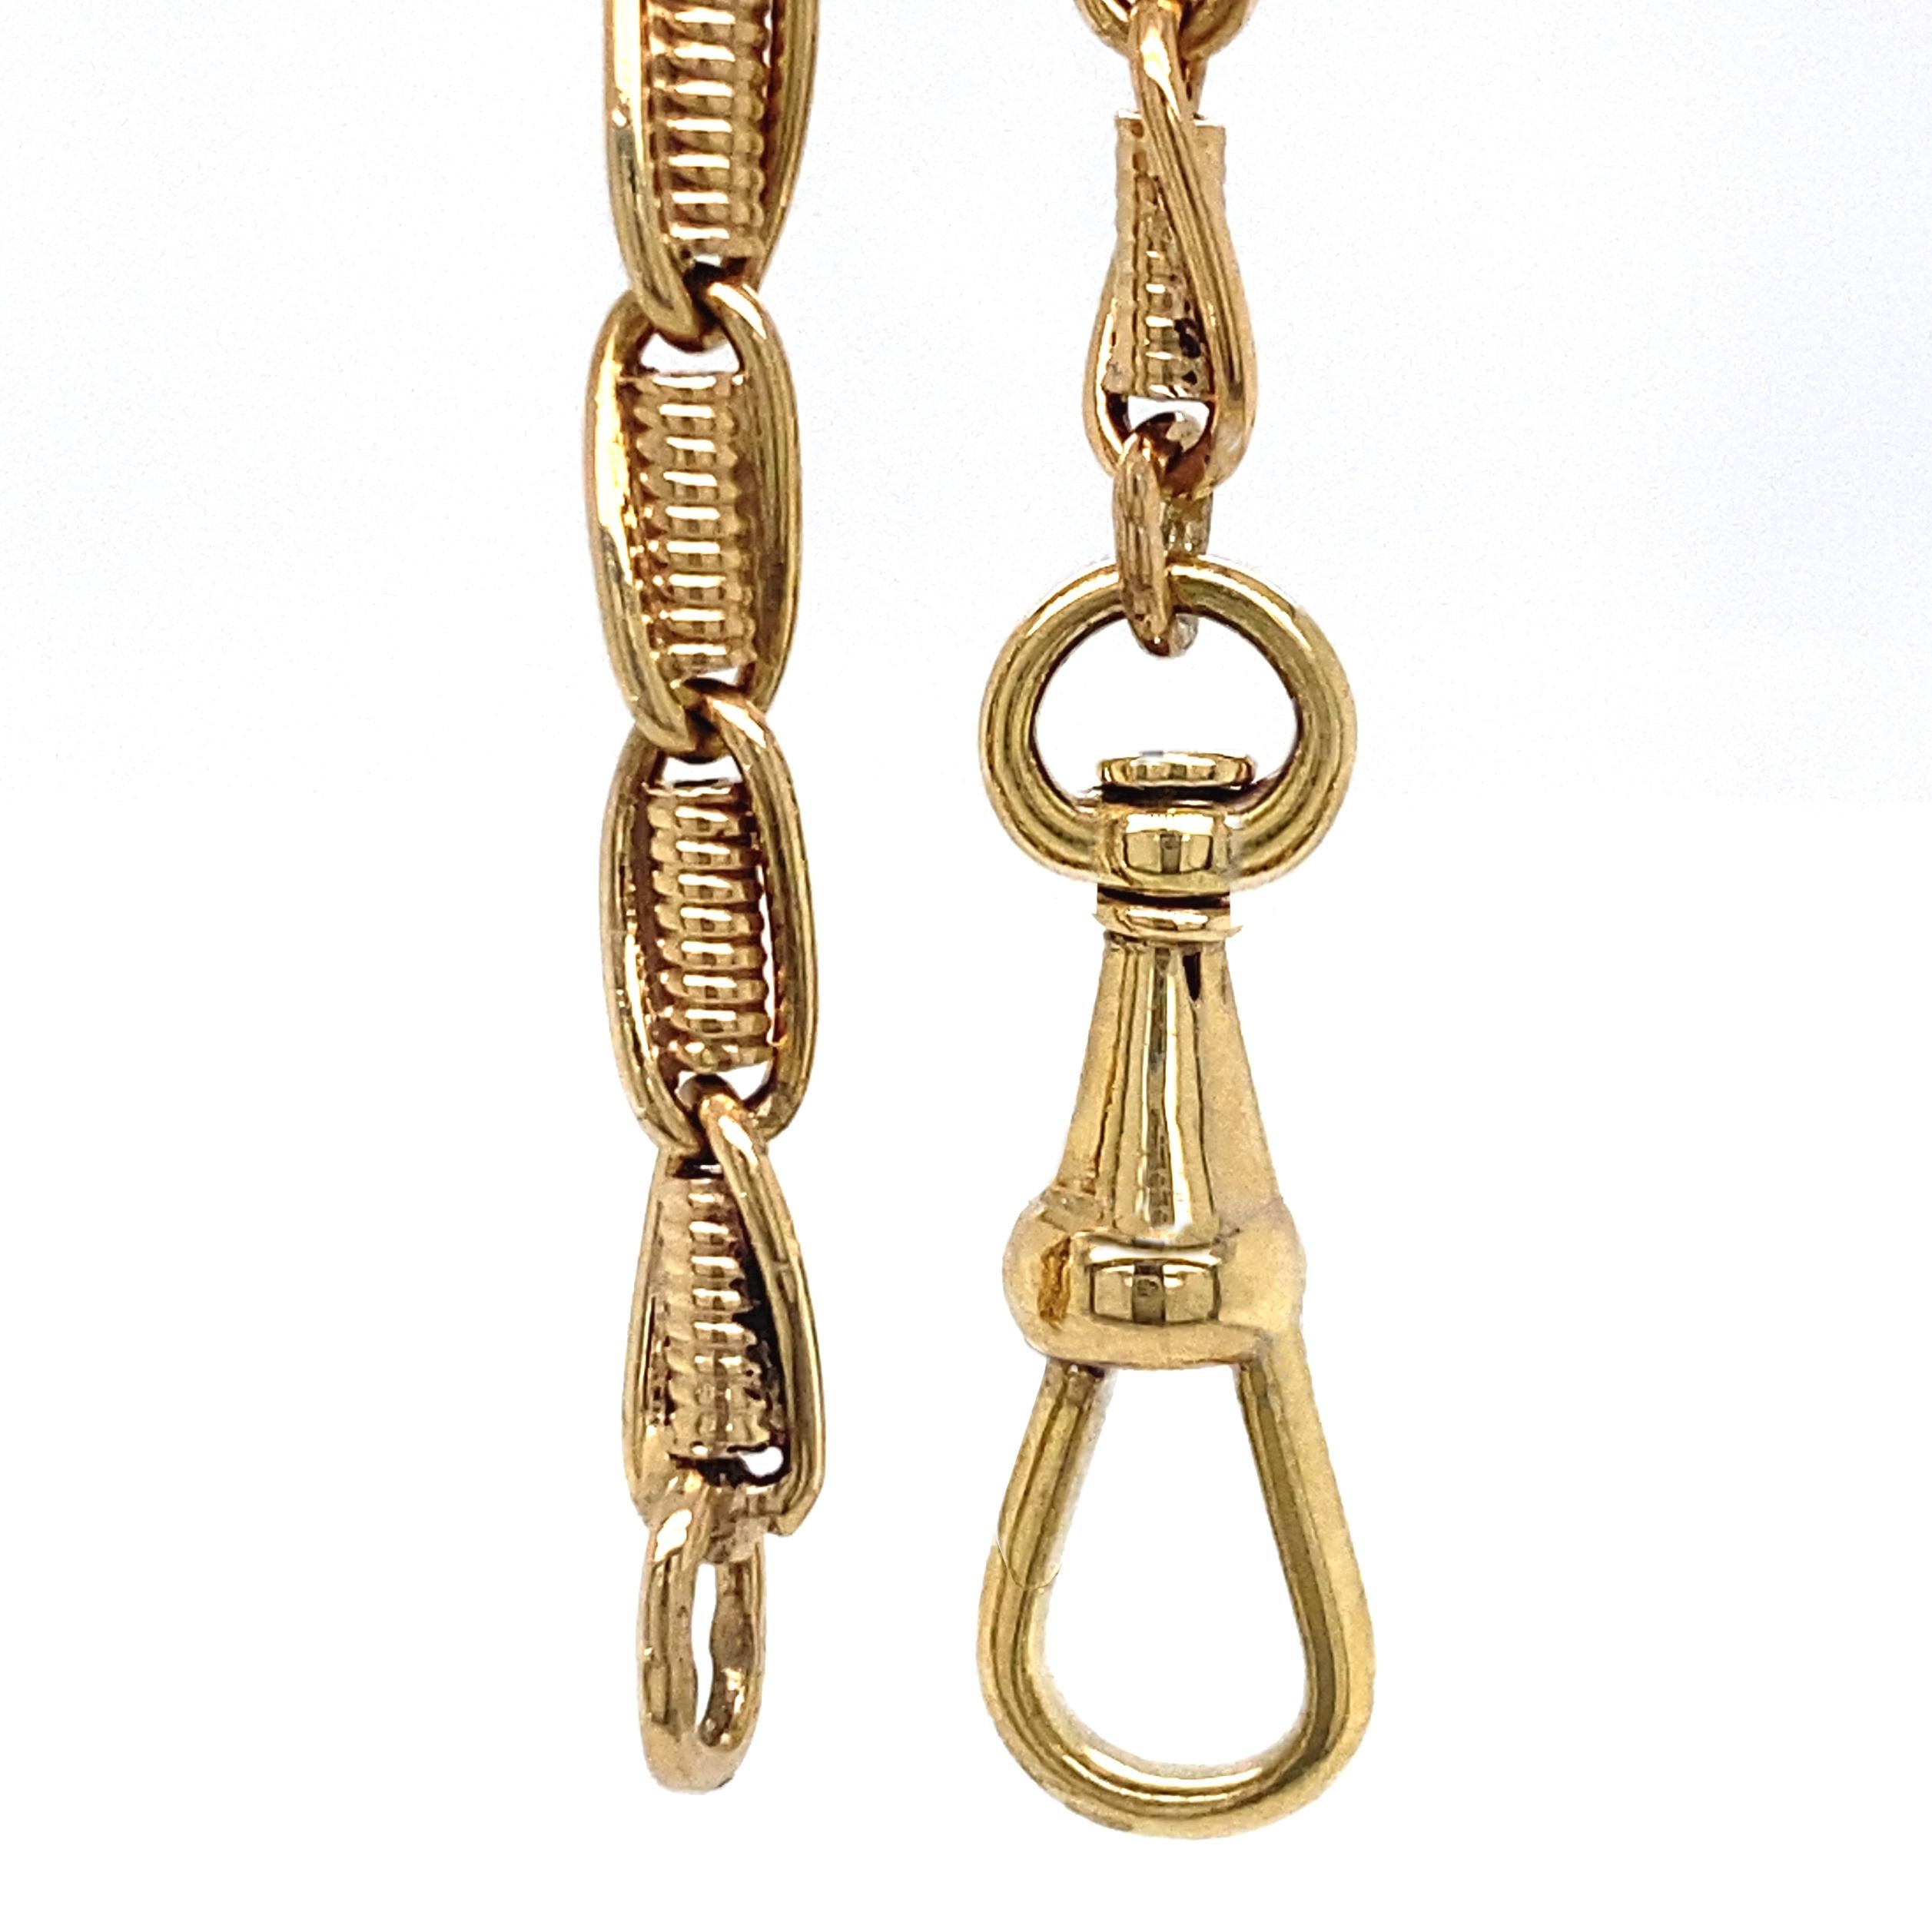 This is an old watch chain that long ago got separated from its watch.  We added a dog (aka swivel) clip and now it's just as moderne and versatile as can be at 21